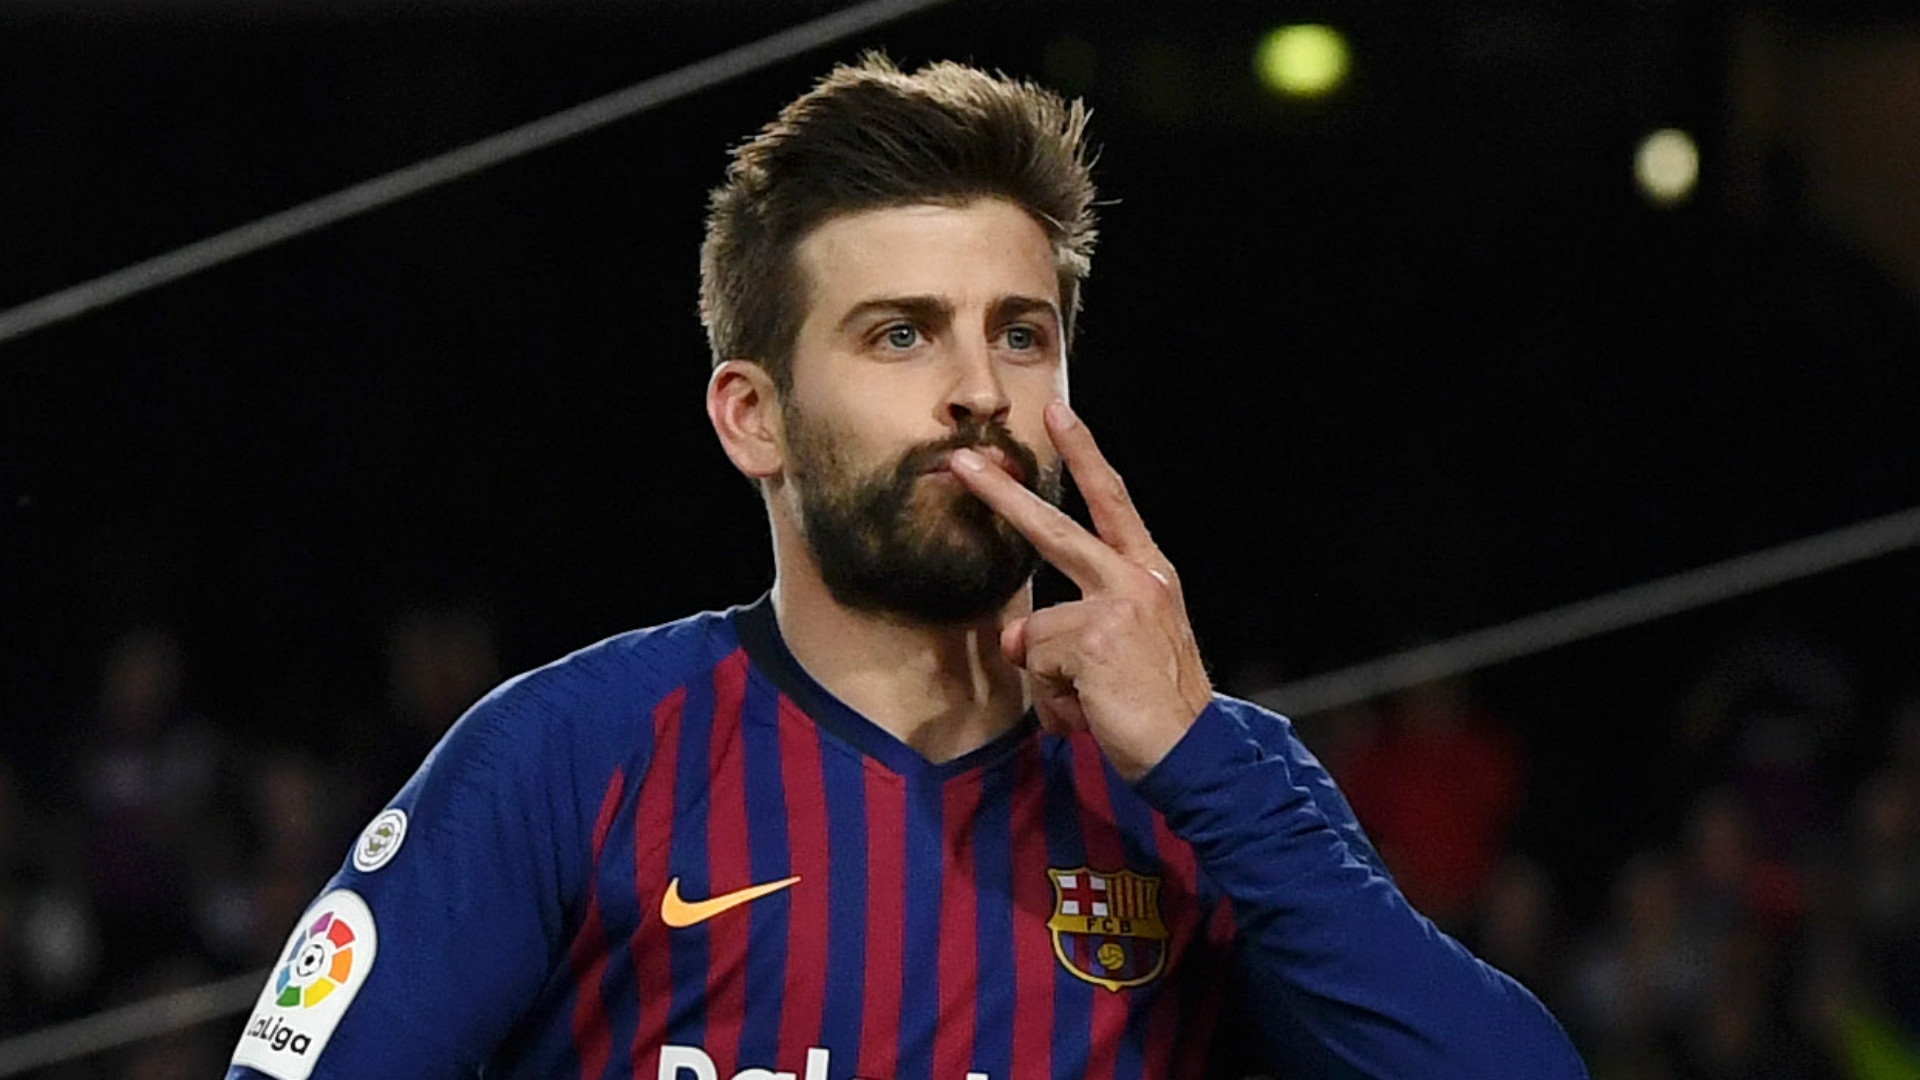 1920x1080 Barcelona news: Gerard Pique says he is playing better since retiring from international football with Spain | English Oma